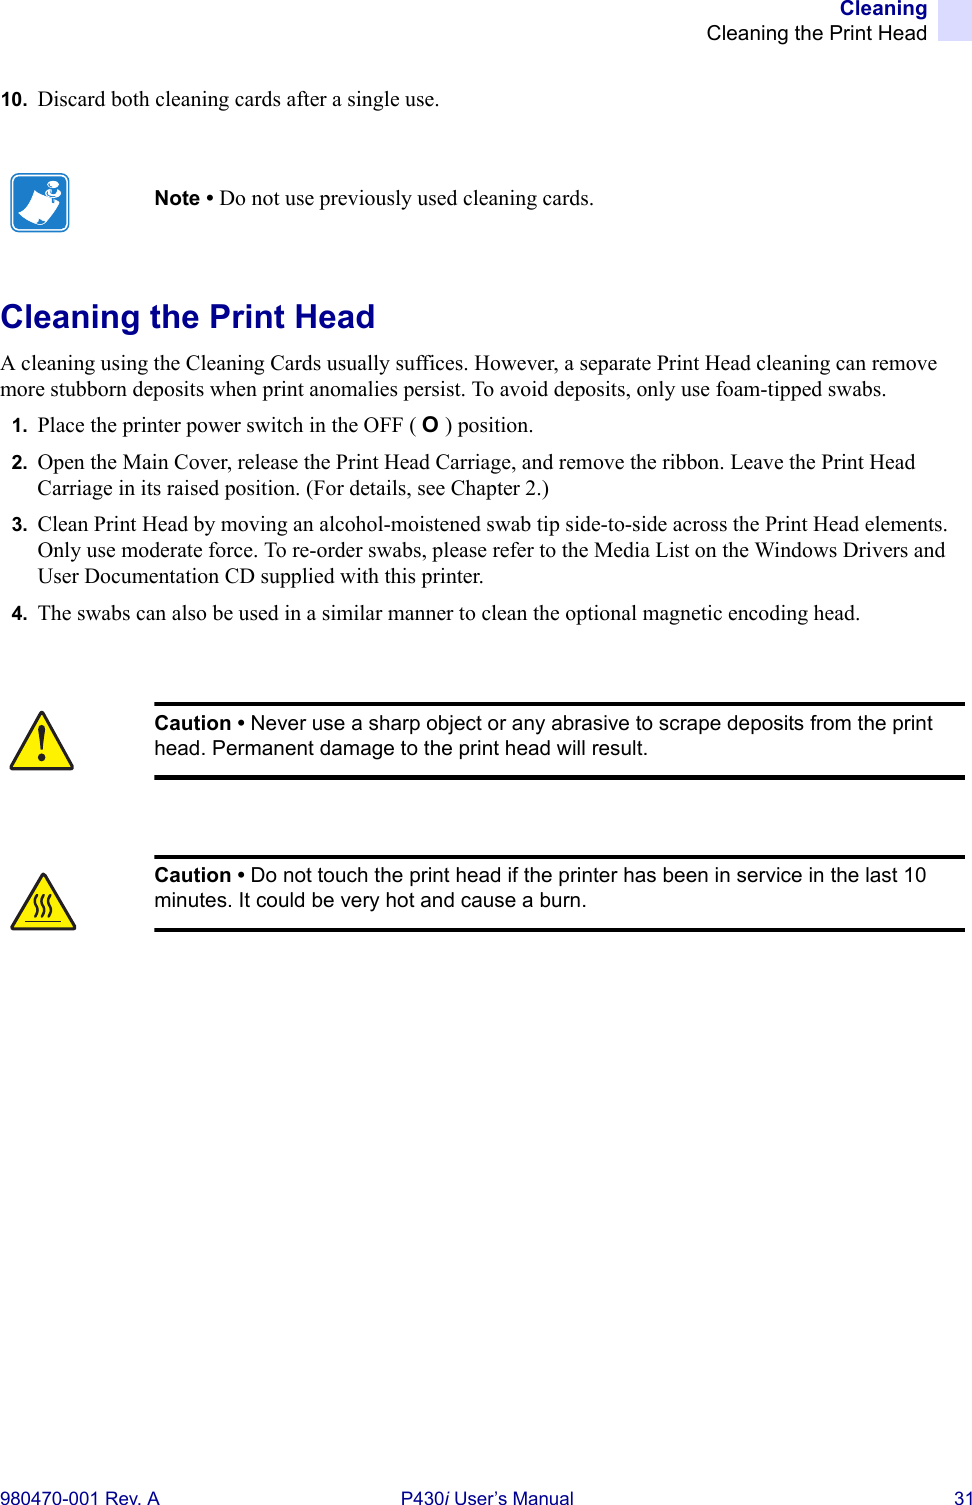 CleaningCleaning the Print Head980470-001 Rev. A P430i User’s Manual 3110. Discard both cleaning cards after a single use.Cleaning the Print HeadA cleaning using the Cleaning Cards usually suffices. However, a separate Print Head cleaning can remove more stubborn deposits when print anomalies persist. To avoid deposits, only use foam-tipped swabs.1. Place the printer power switch in the OFF ( O ) position.2. Open the Main Cover, release the Print Head Carriage, and remove the ribbon. Leave the Print Head Carriage in its raised position. (For details, see Chapter 2.)3. Clean Print Head by moving an alcohol-moistened swab tip side-to-side across the Print Head elements. Only use moderate force. To re-order swabs, please refer to the Media List on the Windows Drivers and User Documentation CD supplied with this printer.4. The swabs can also be used in a similar manner to clean the optional magnetic encoding head.Note • Do not use previously used cleaning cards.Caution • Never use a sharp object or any abrasive to scrape deposits from the print head. Permanent damage to the print head will result.Caution • Do not touch the print head if the printer has been in service in the last 10 minutes. It could be very hot and cause a burn.